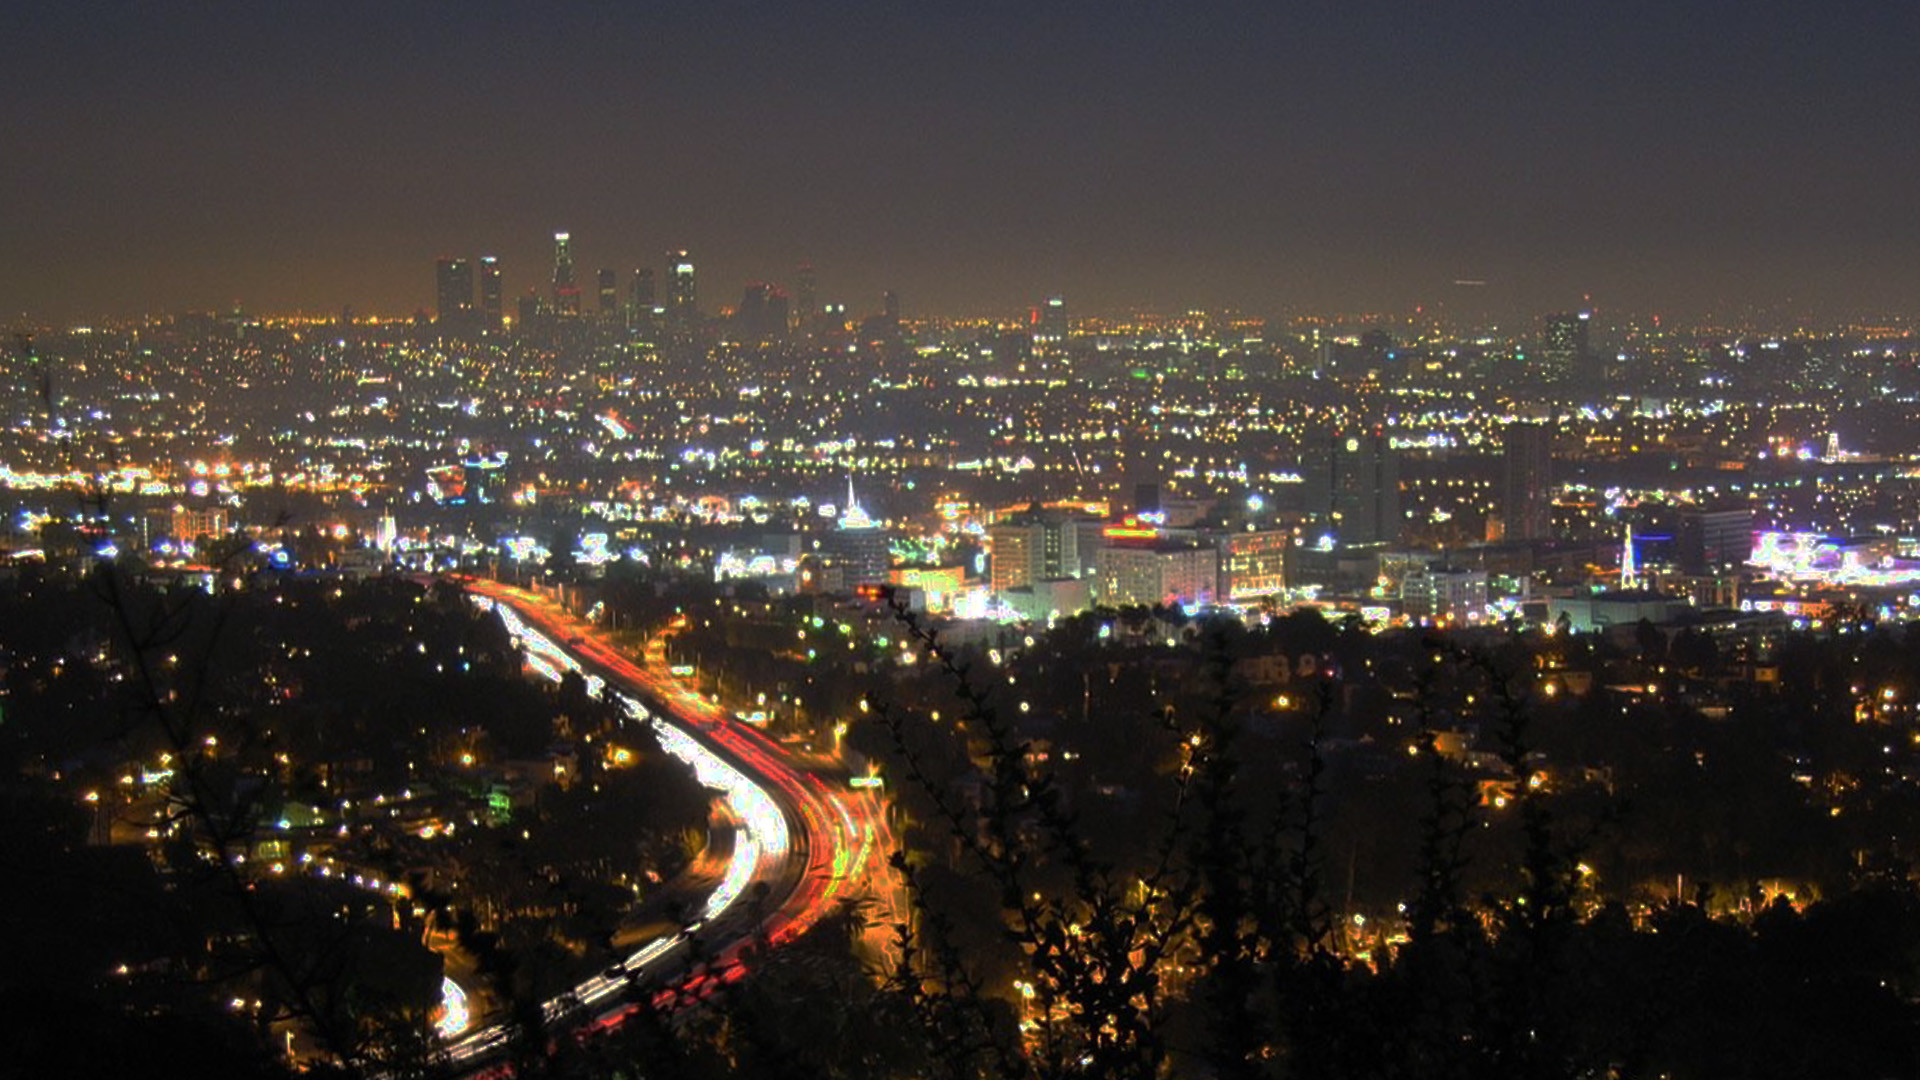 1920x1080 Downtown Los Angeles Wallpaper: Los Angeles At Night Wallpaper px